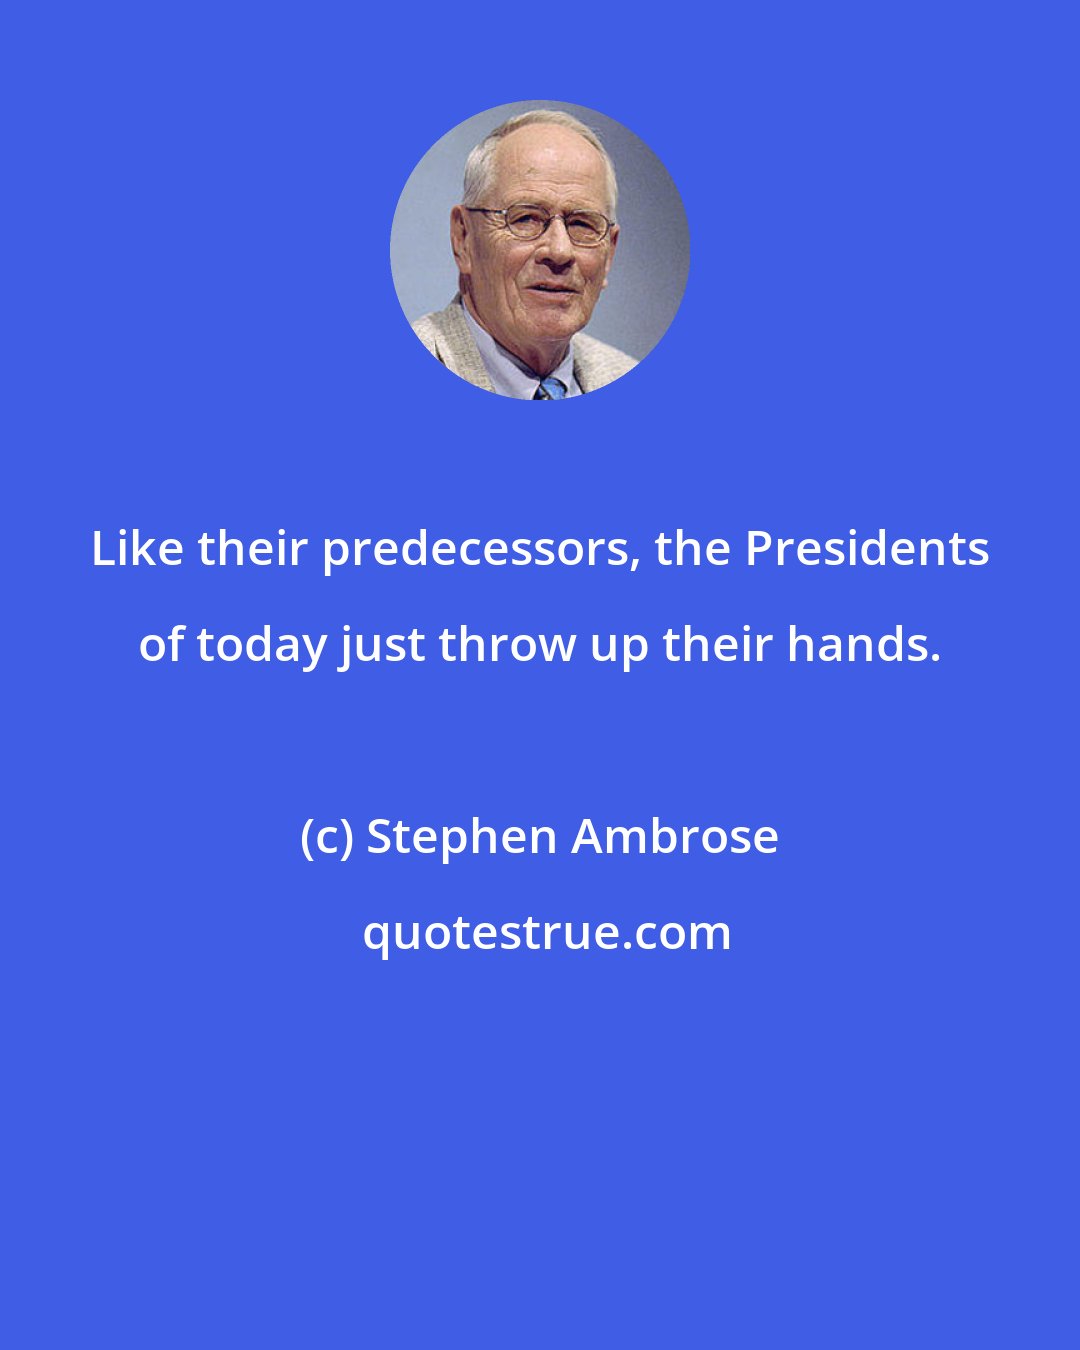 Stephen Ambrose: Like their predecessors, the Presidents of today just throw up their hands.